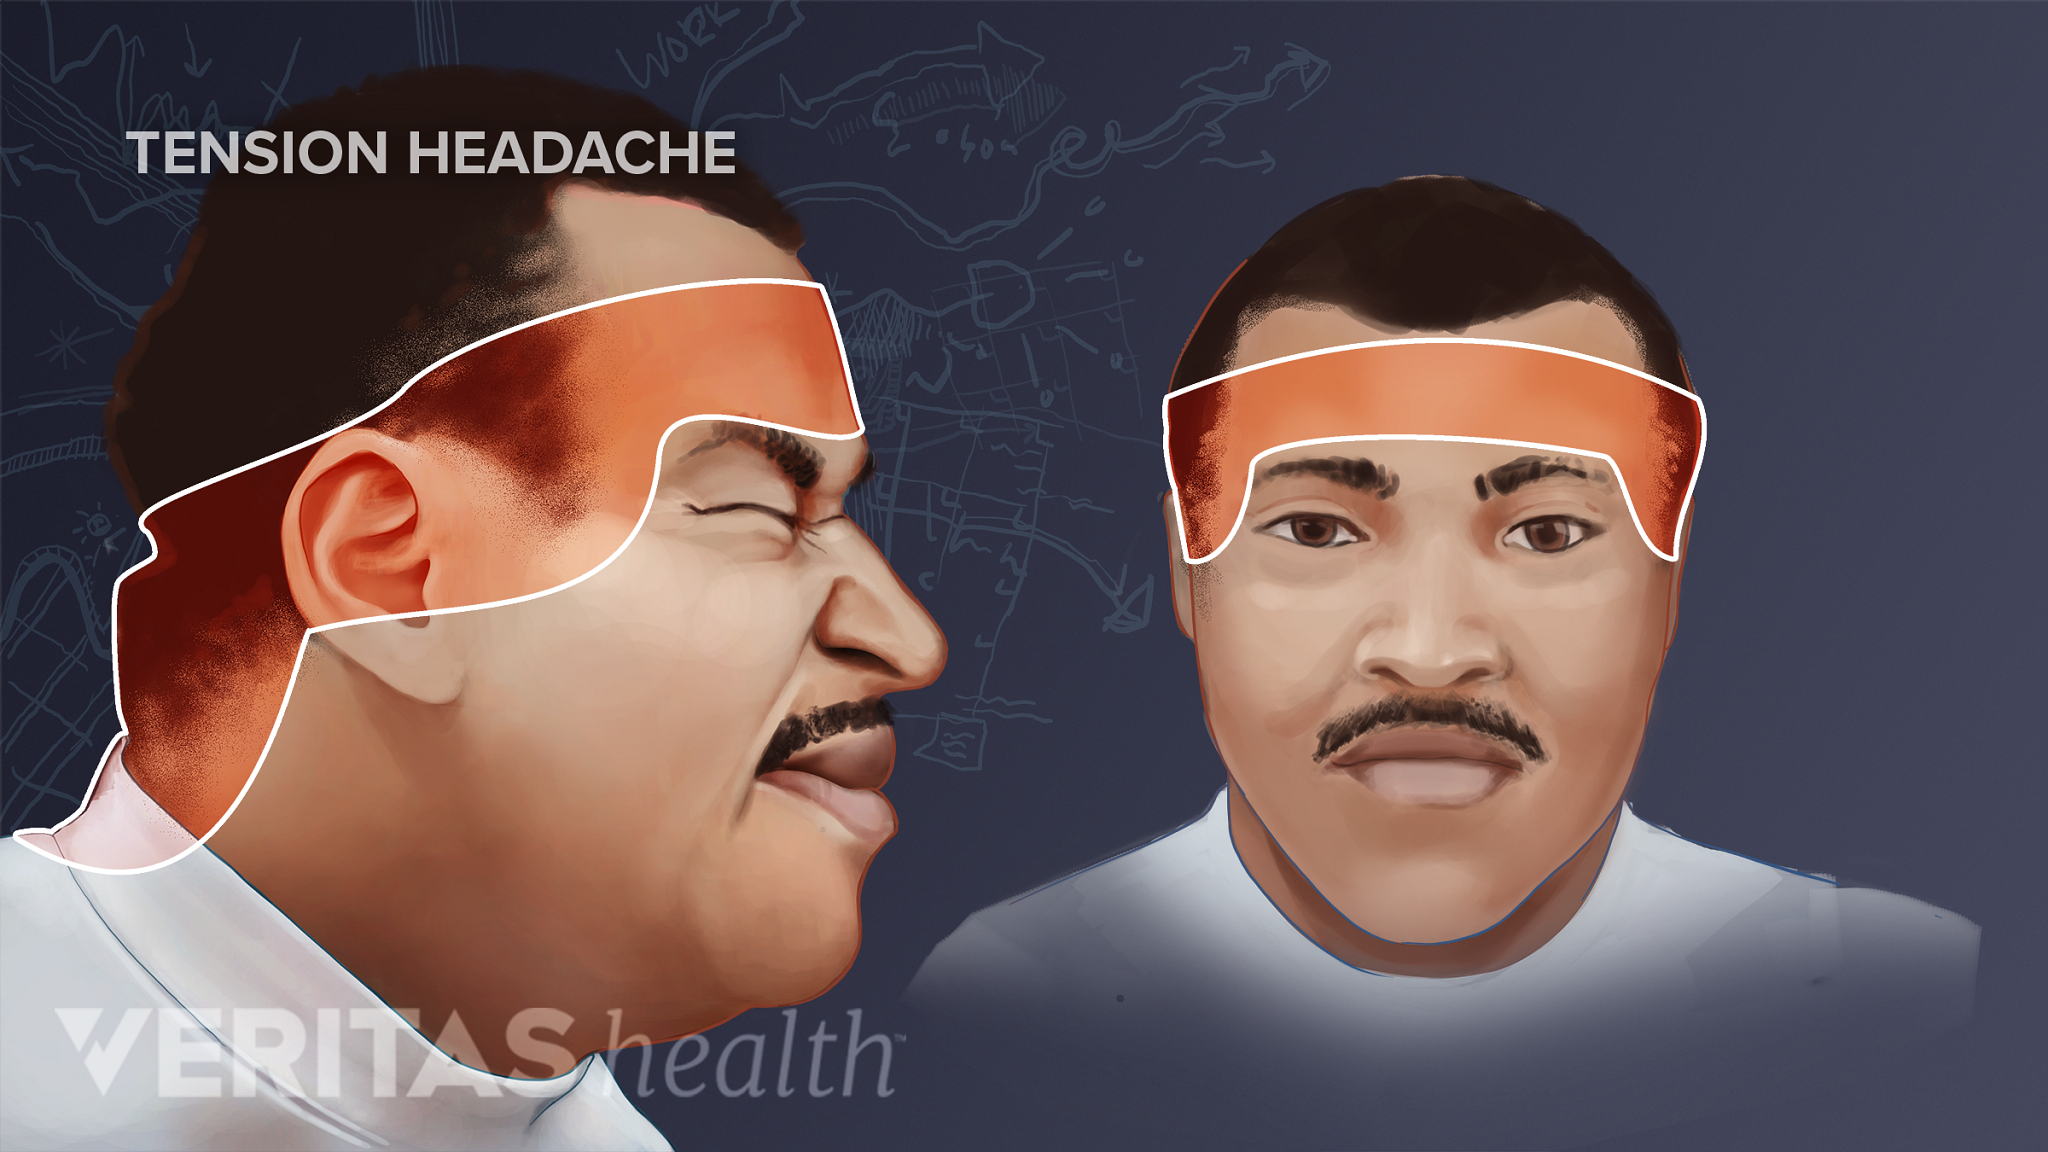 Profile and anterior view of the areas effected by a tension headache.